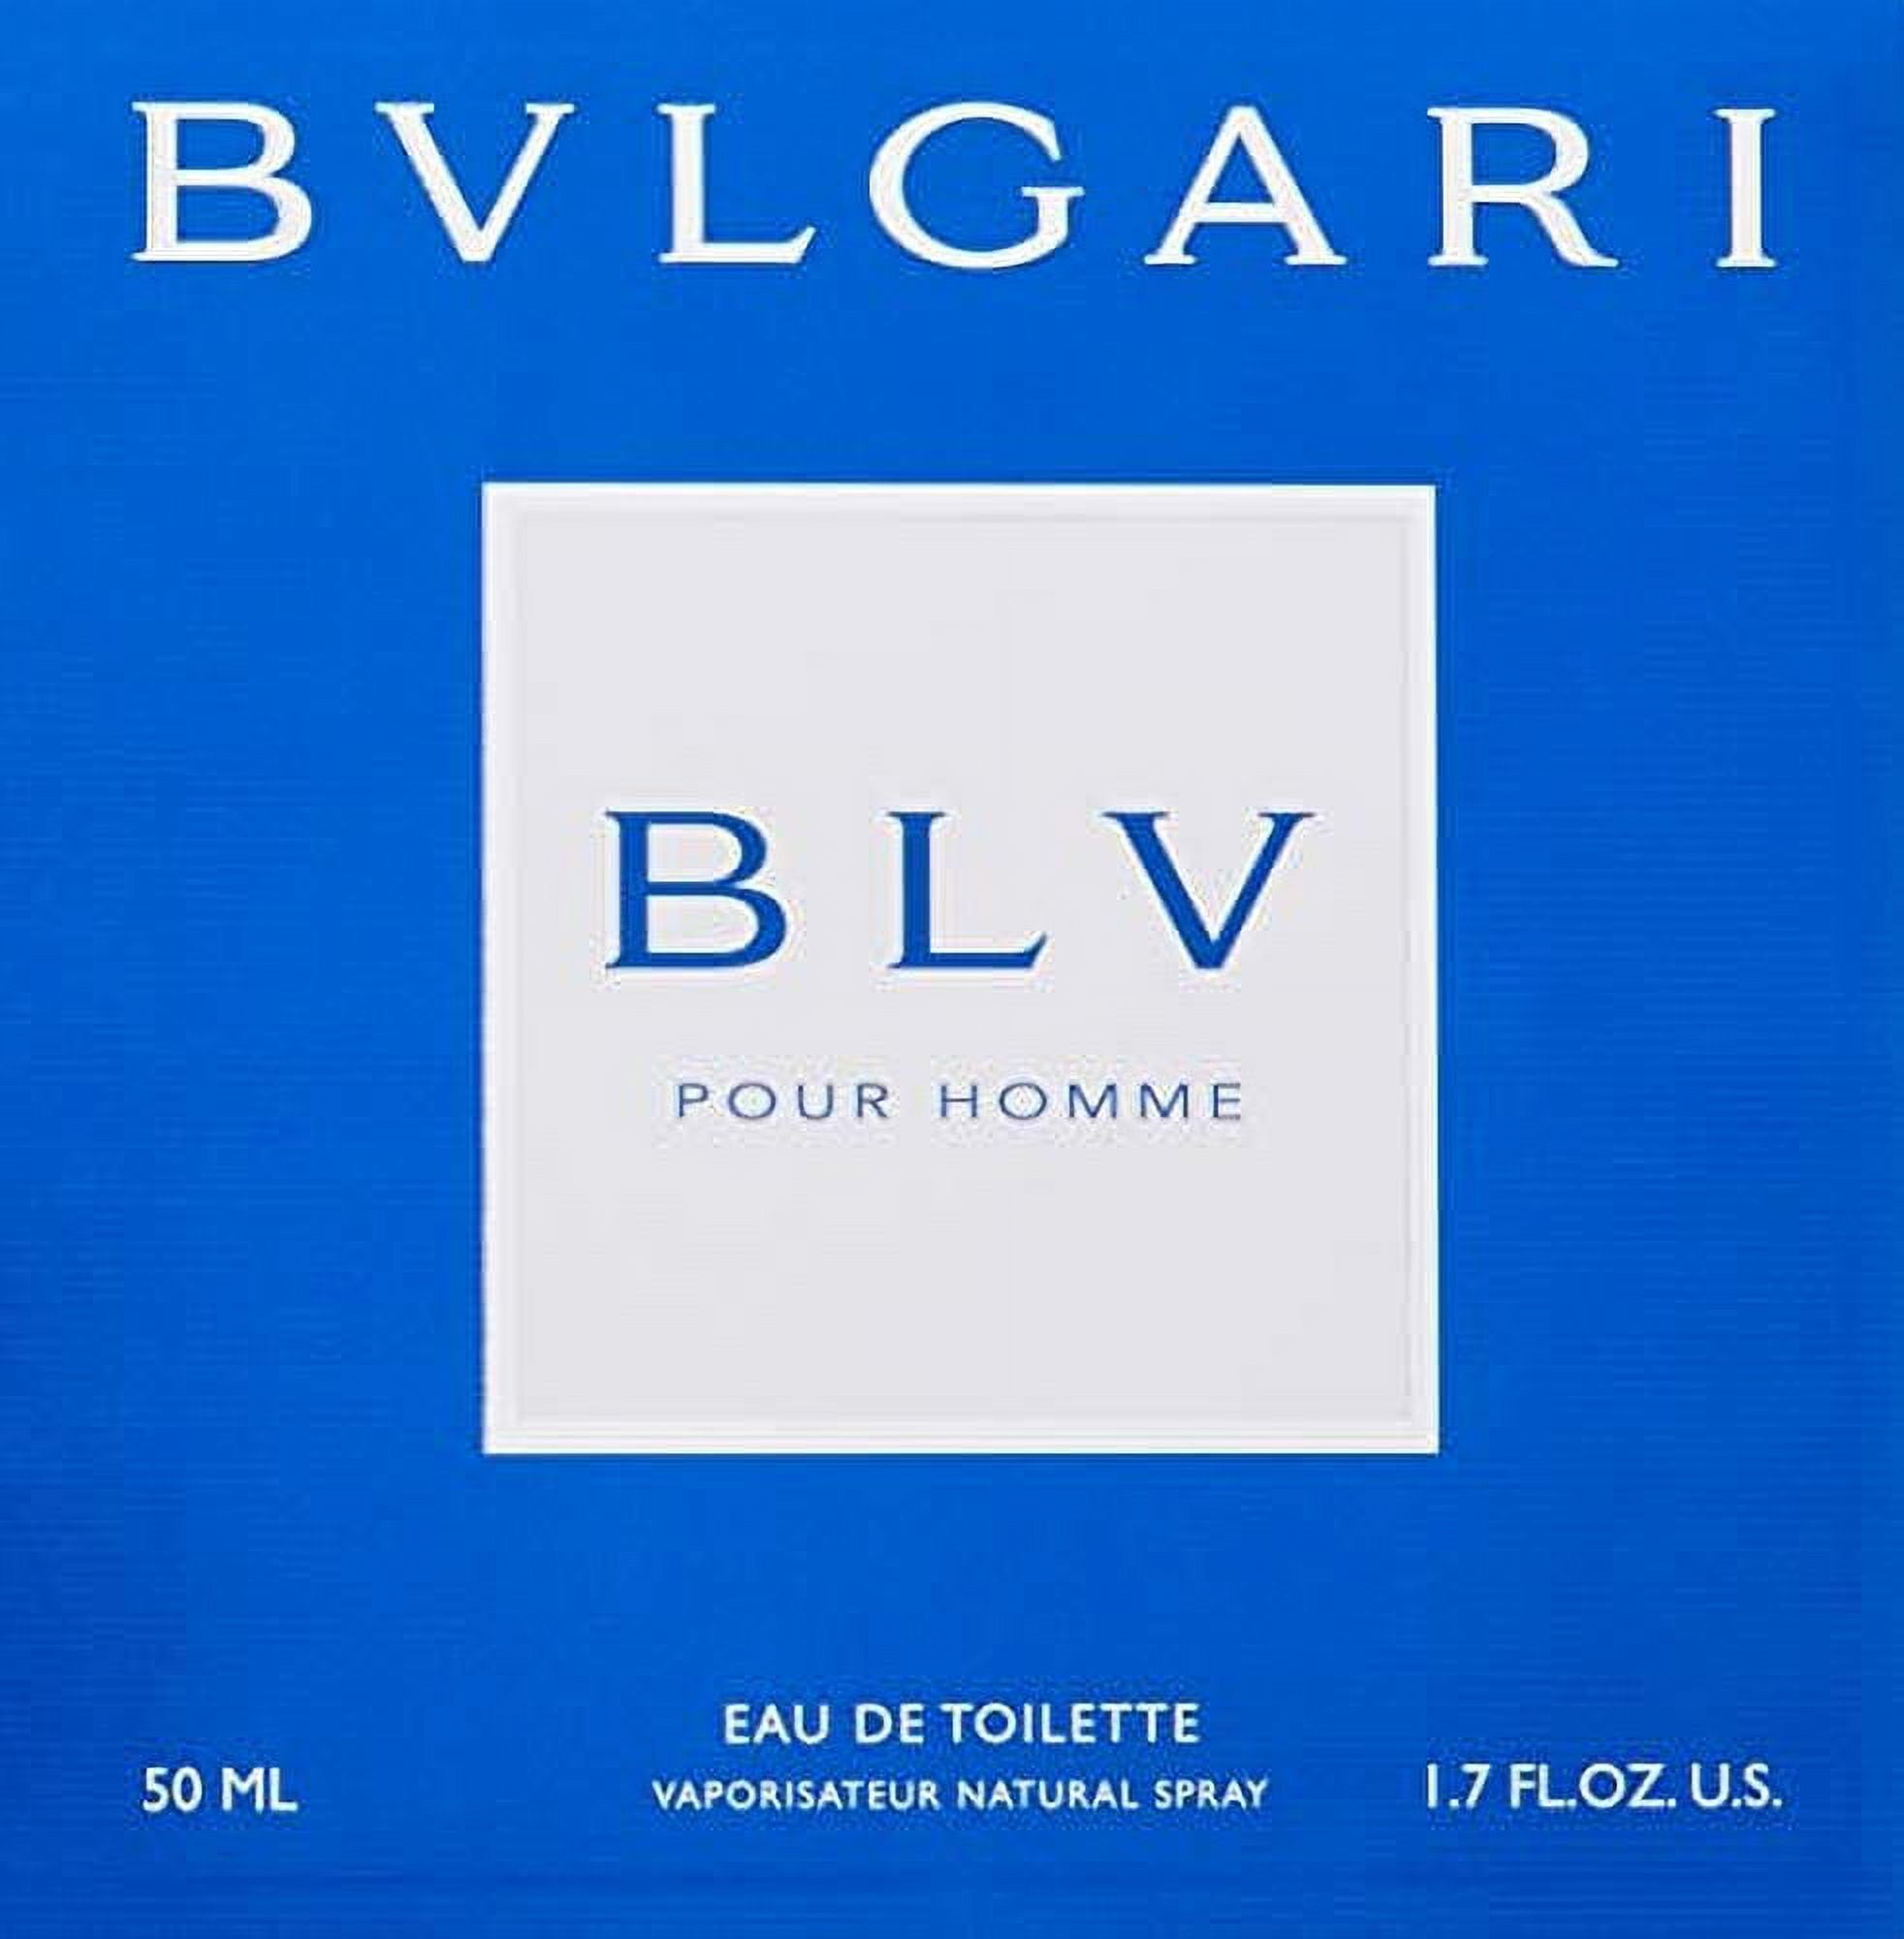 BLV Pour homme by Bvlgari Aftershave LotionAftershave balm 3.4 oz 100 ml  for Men